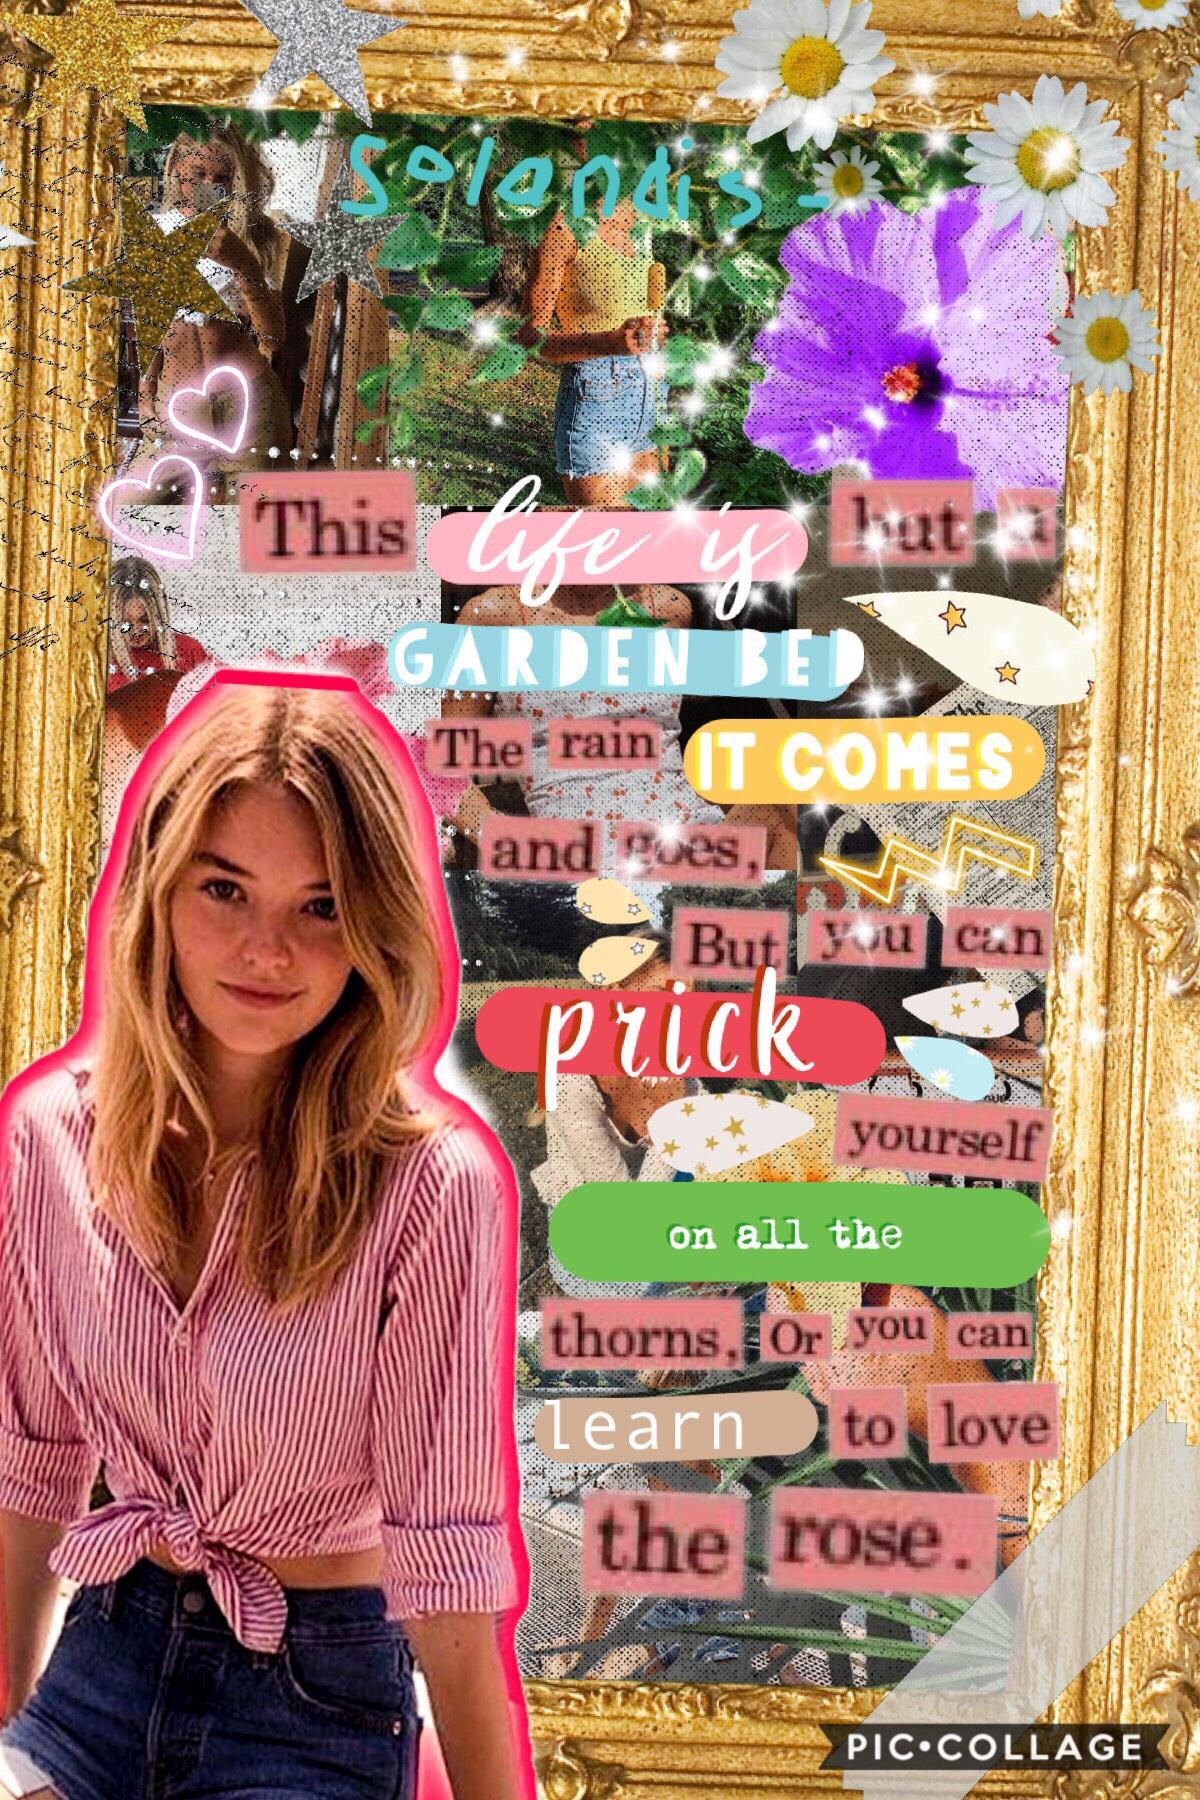 🌙🌹🌼 t a p 🌼🌹🌙 7.5.19. Friday

Happy Friday ⚡️ I hope you like my collage ♥️ Rate outa 10 💫 have a lovely day 🌙 QOTD: Are you watching the Women’s World Cup ⚽️ AOTD: HECKA YEAH
